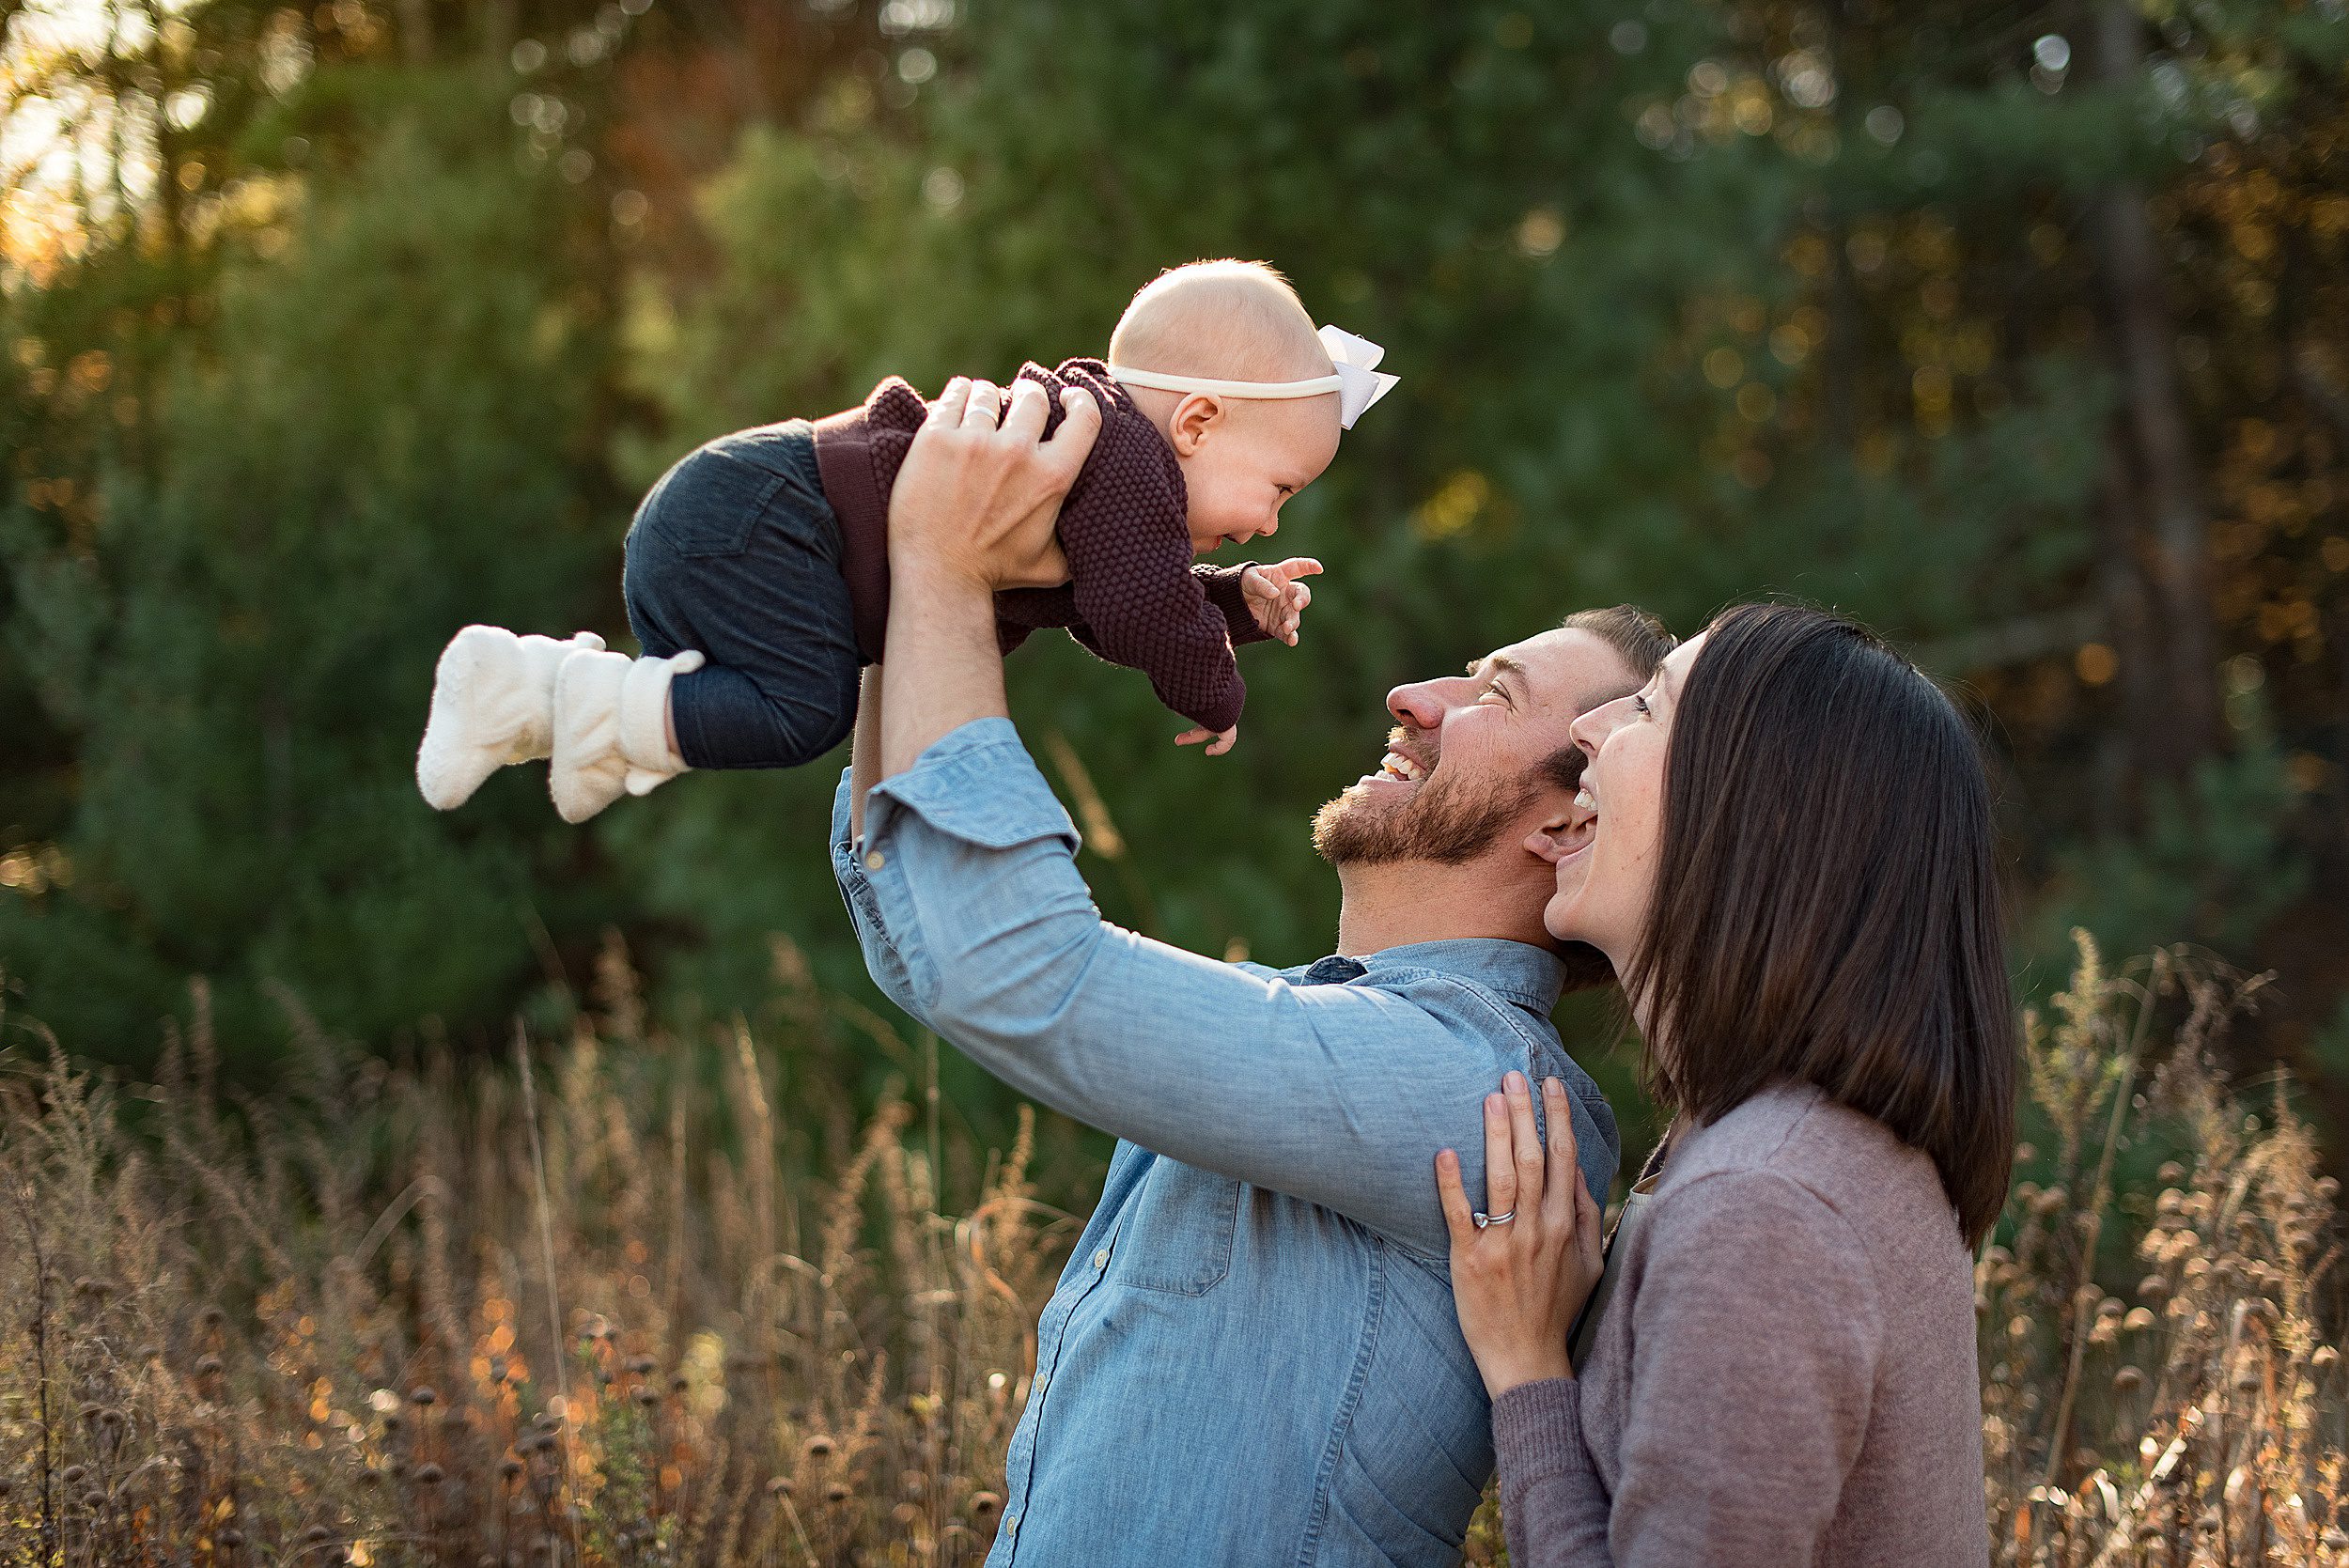 A happy mom and dad lift and play with their toddler daugher in a park at sunset